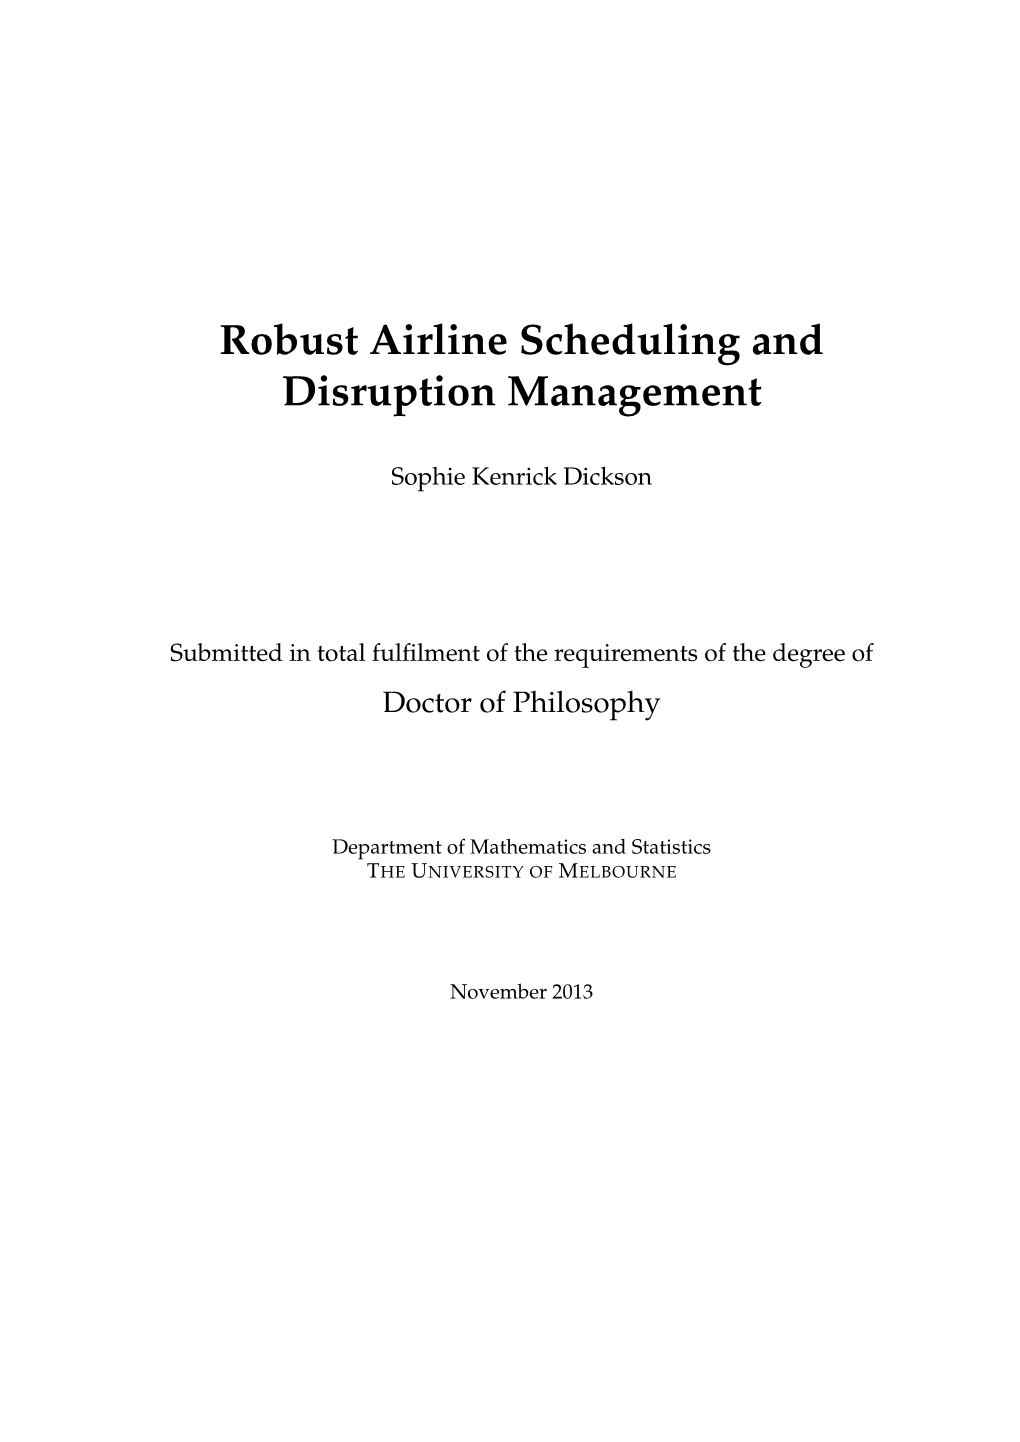 Robust Airline Scheduling and Disruption Management